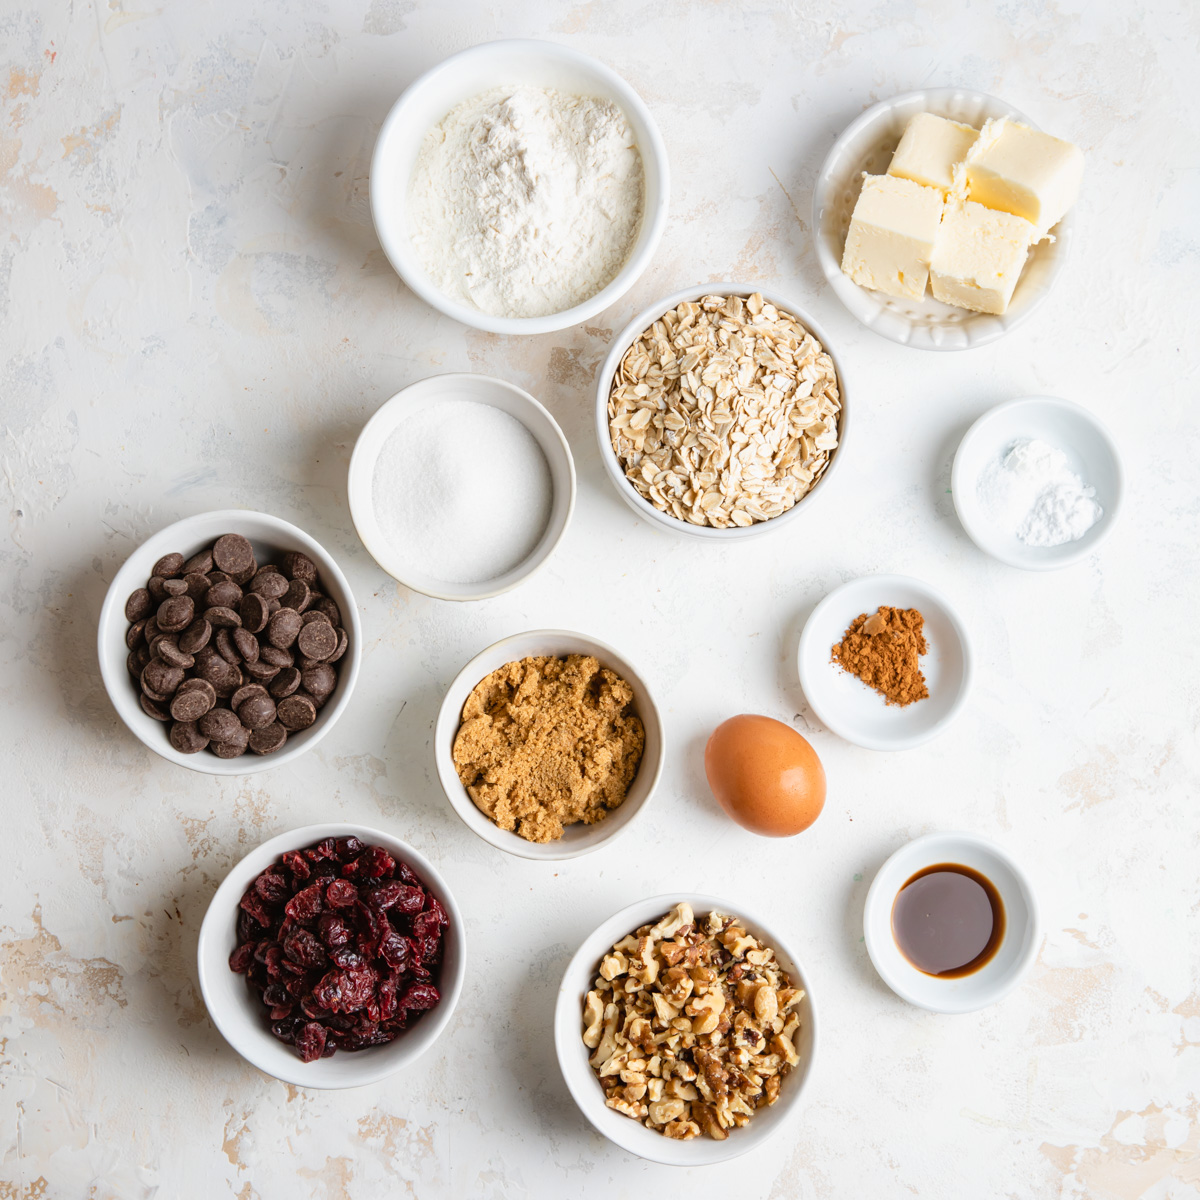 All the ingredients needed to make oatmeal craisin cookies